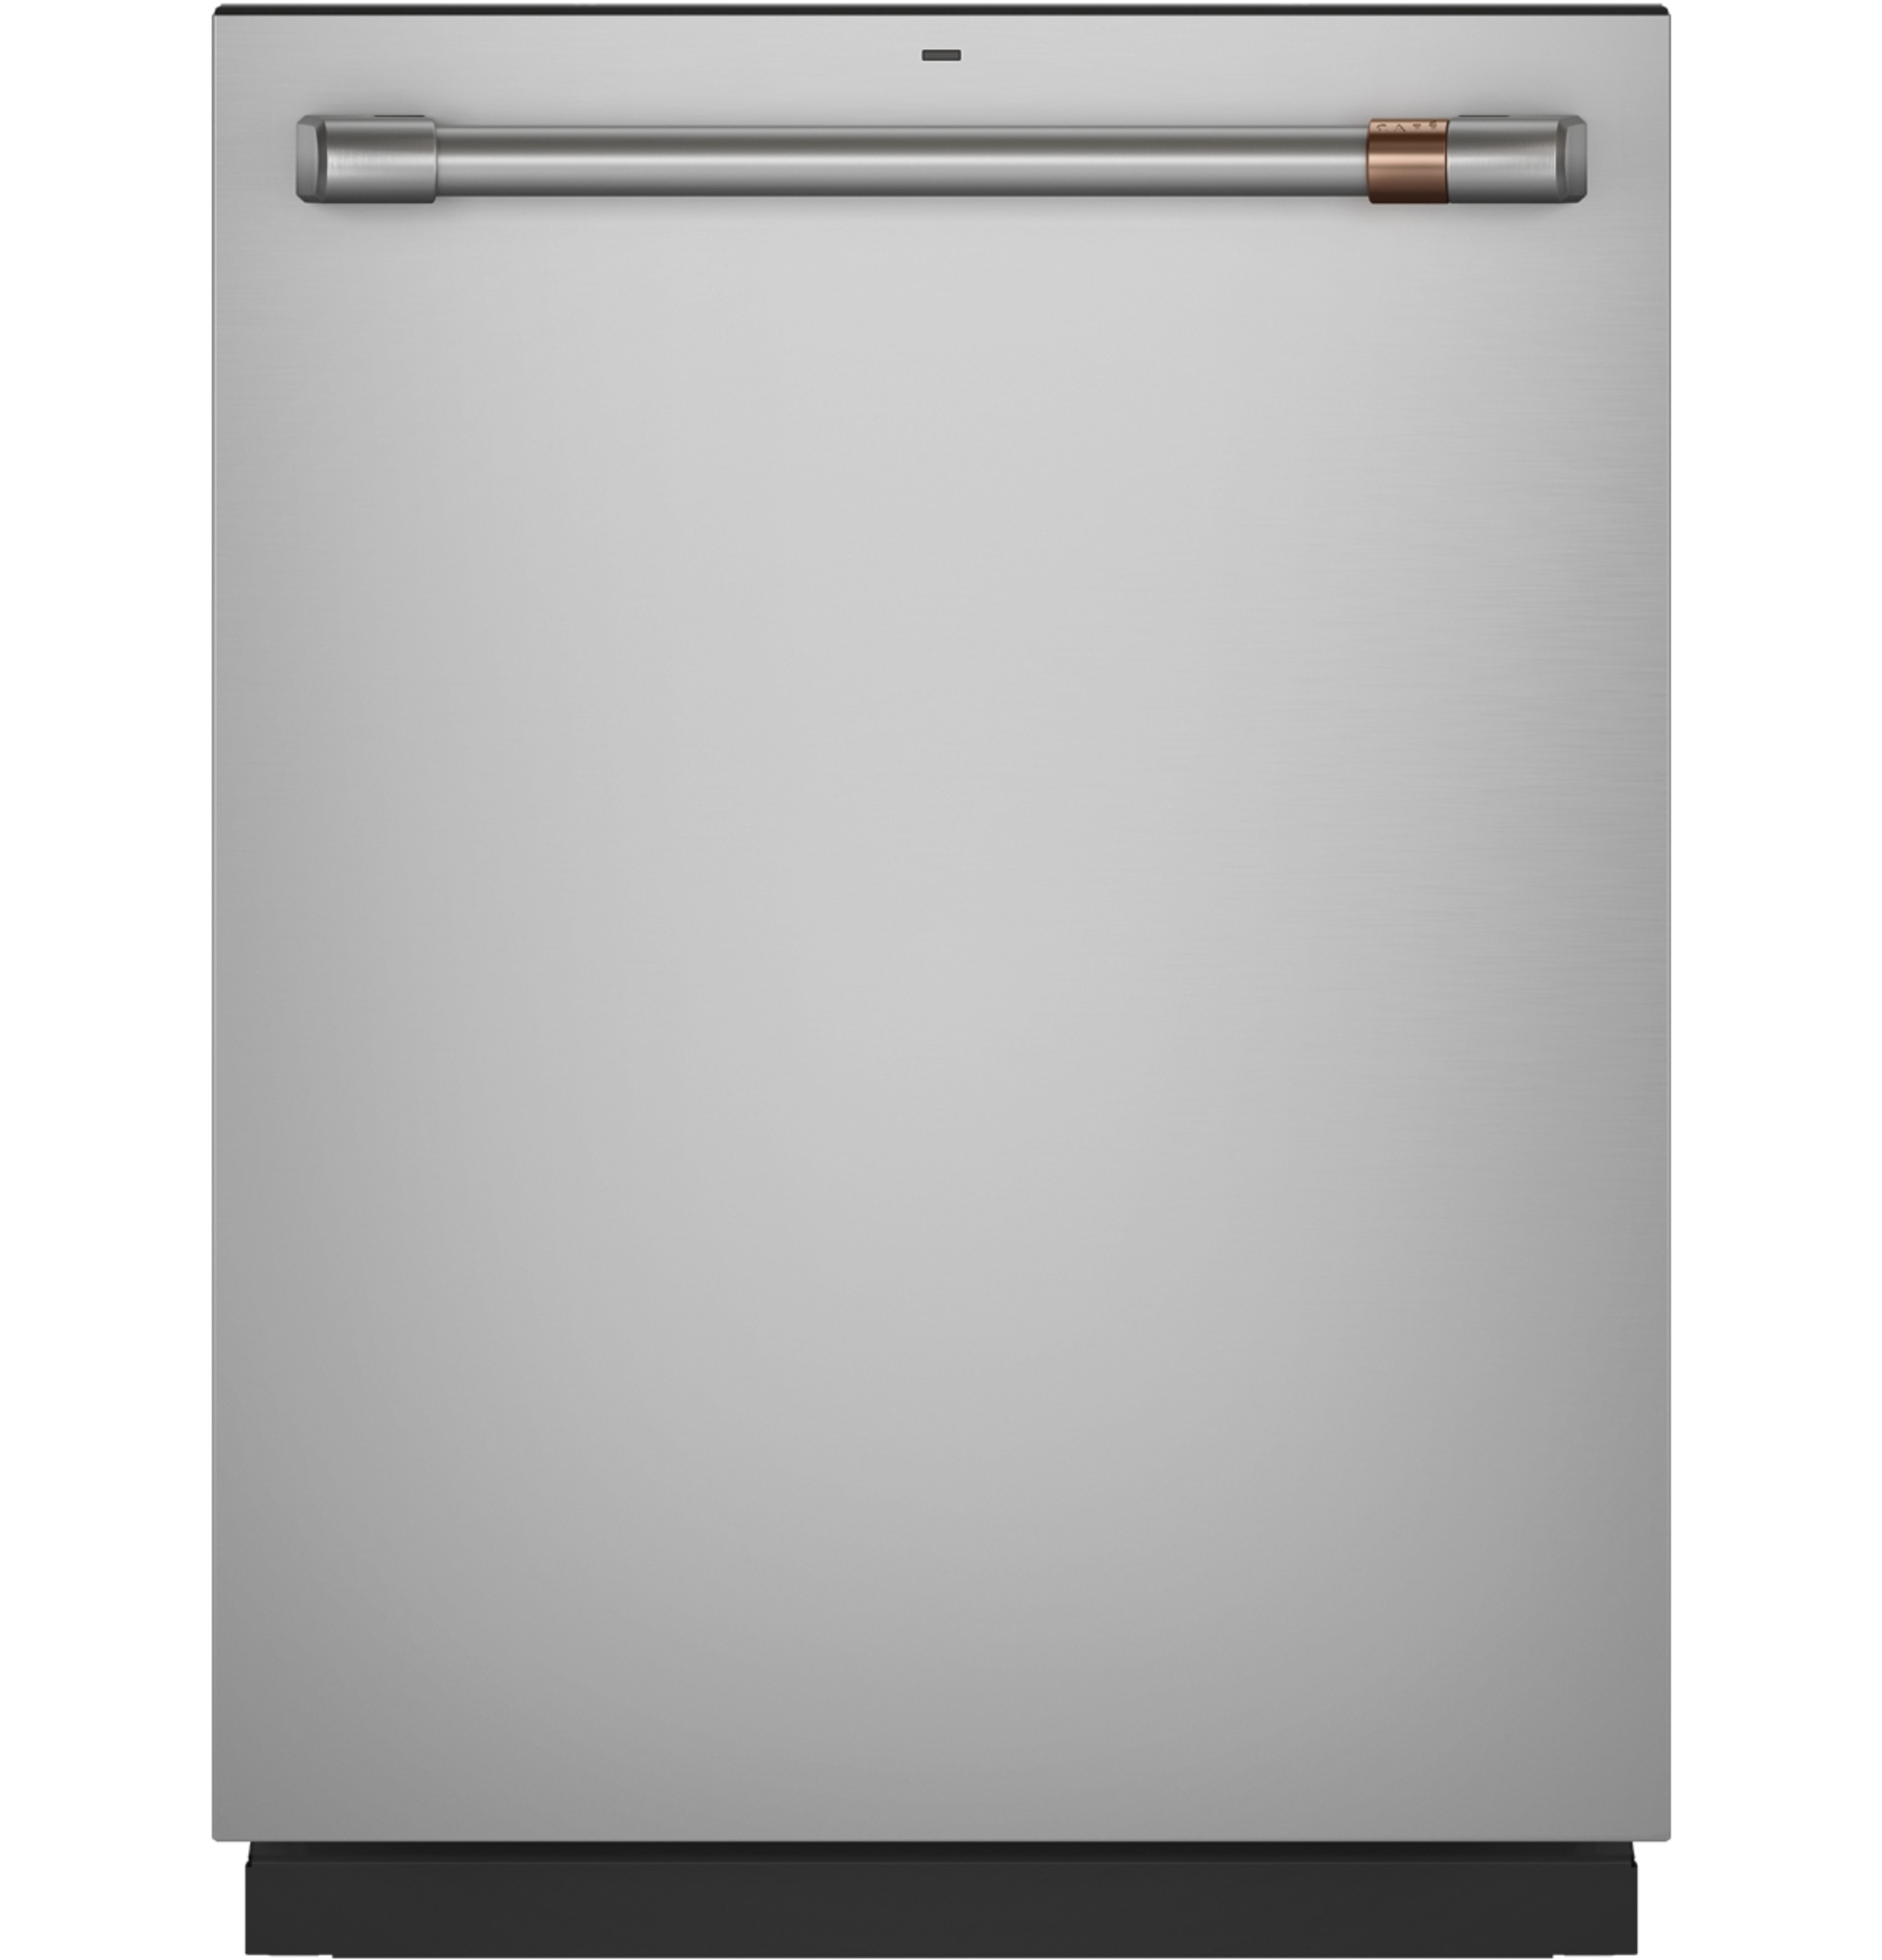 CAFE 24 Inch Built In Fully Integrated Dishwasher with Delay Start